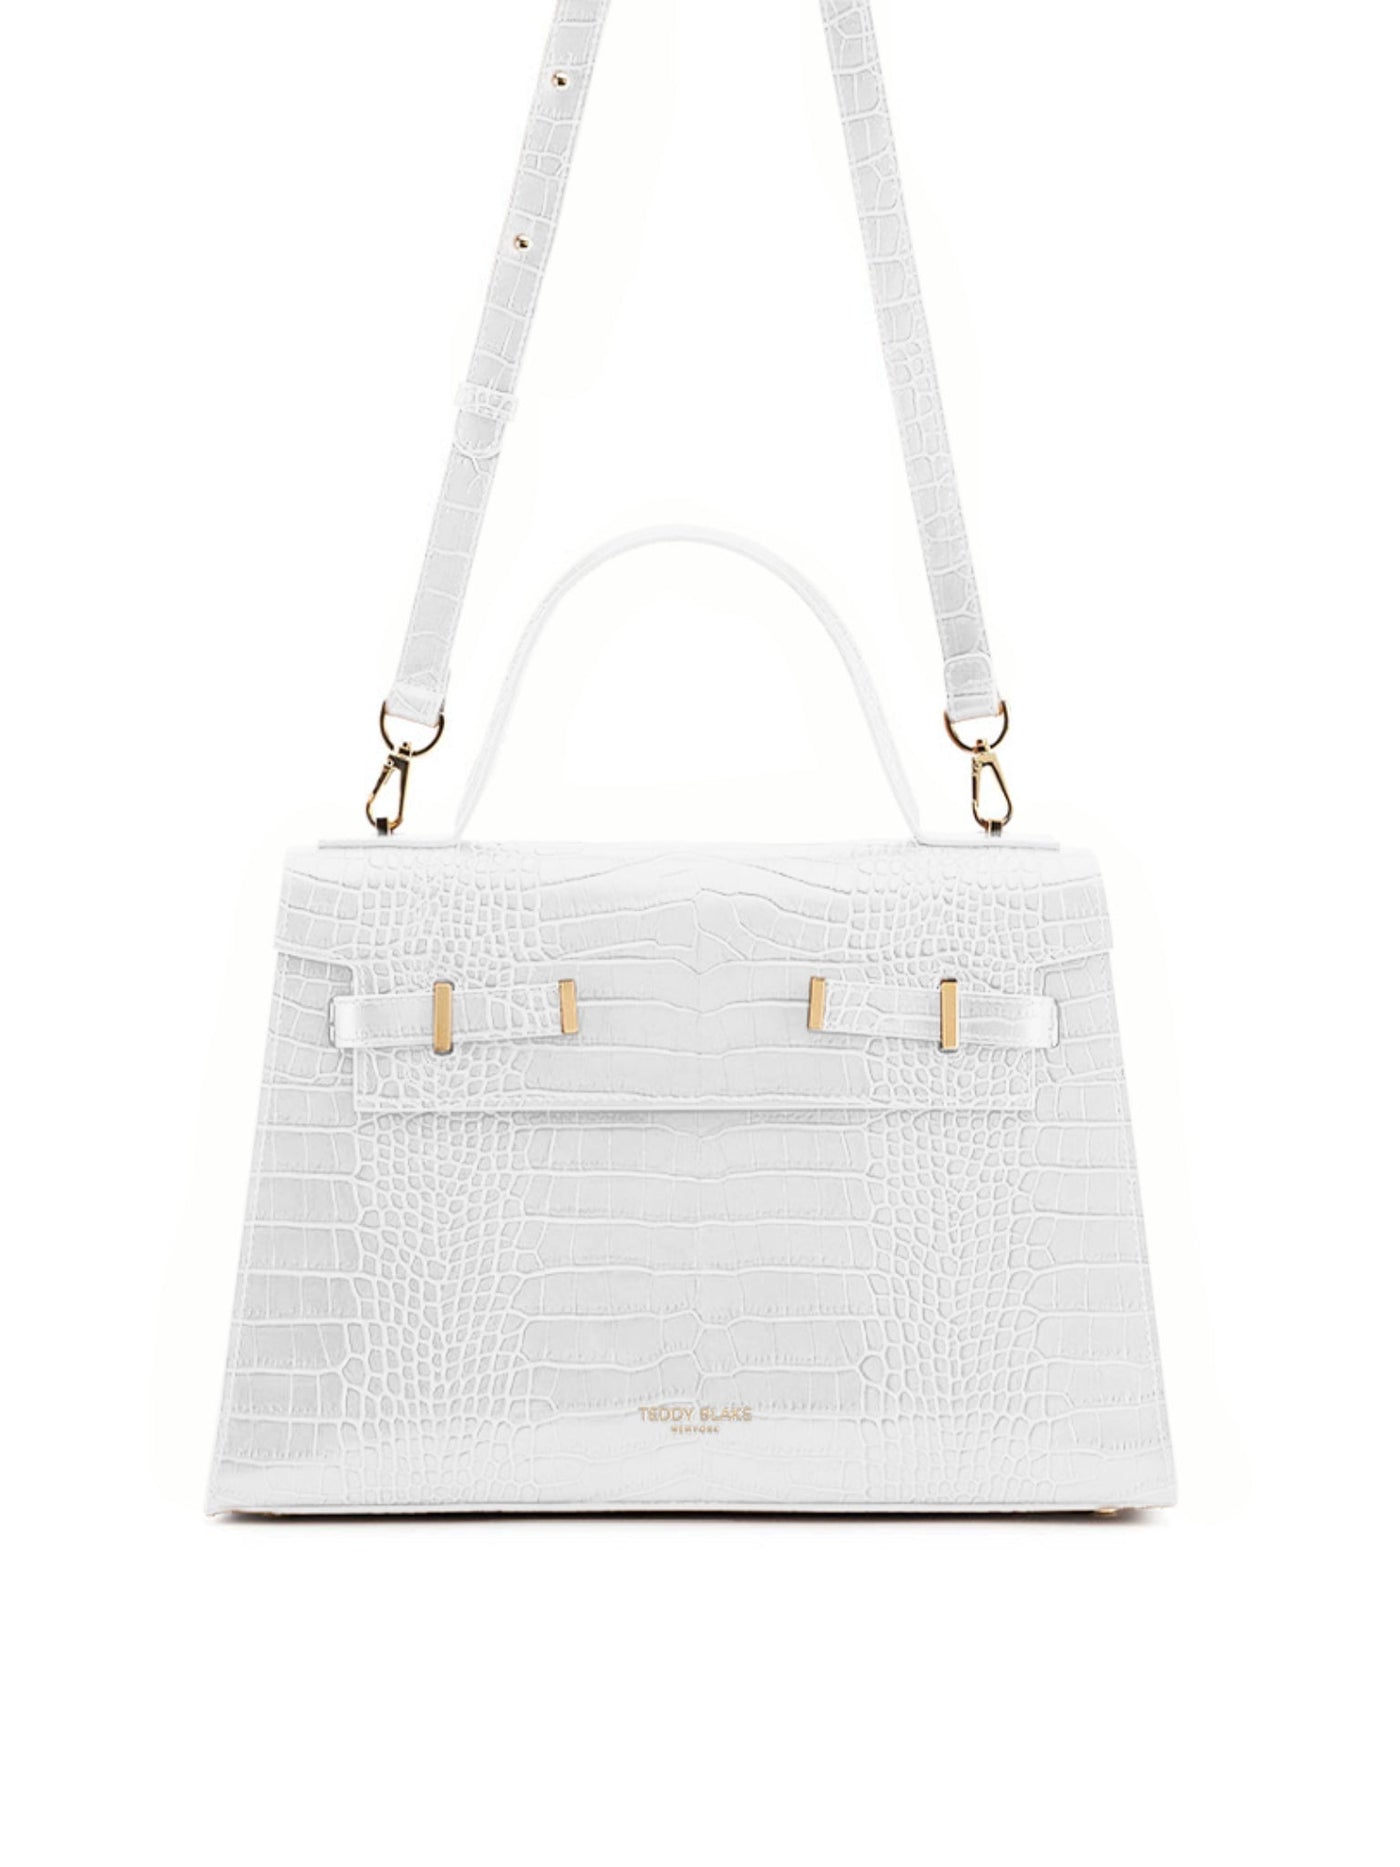 The Ava - Structured Crossbody Purse - Available in 4 sizes and 50+ colors!  - Teddy Blake – Tagged croco